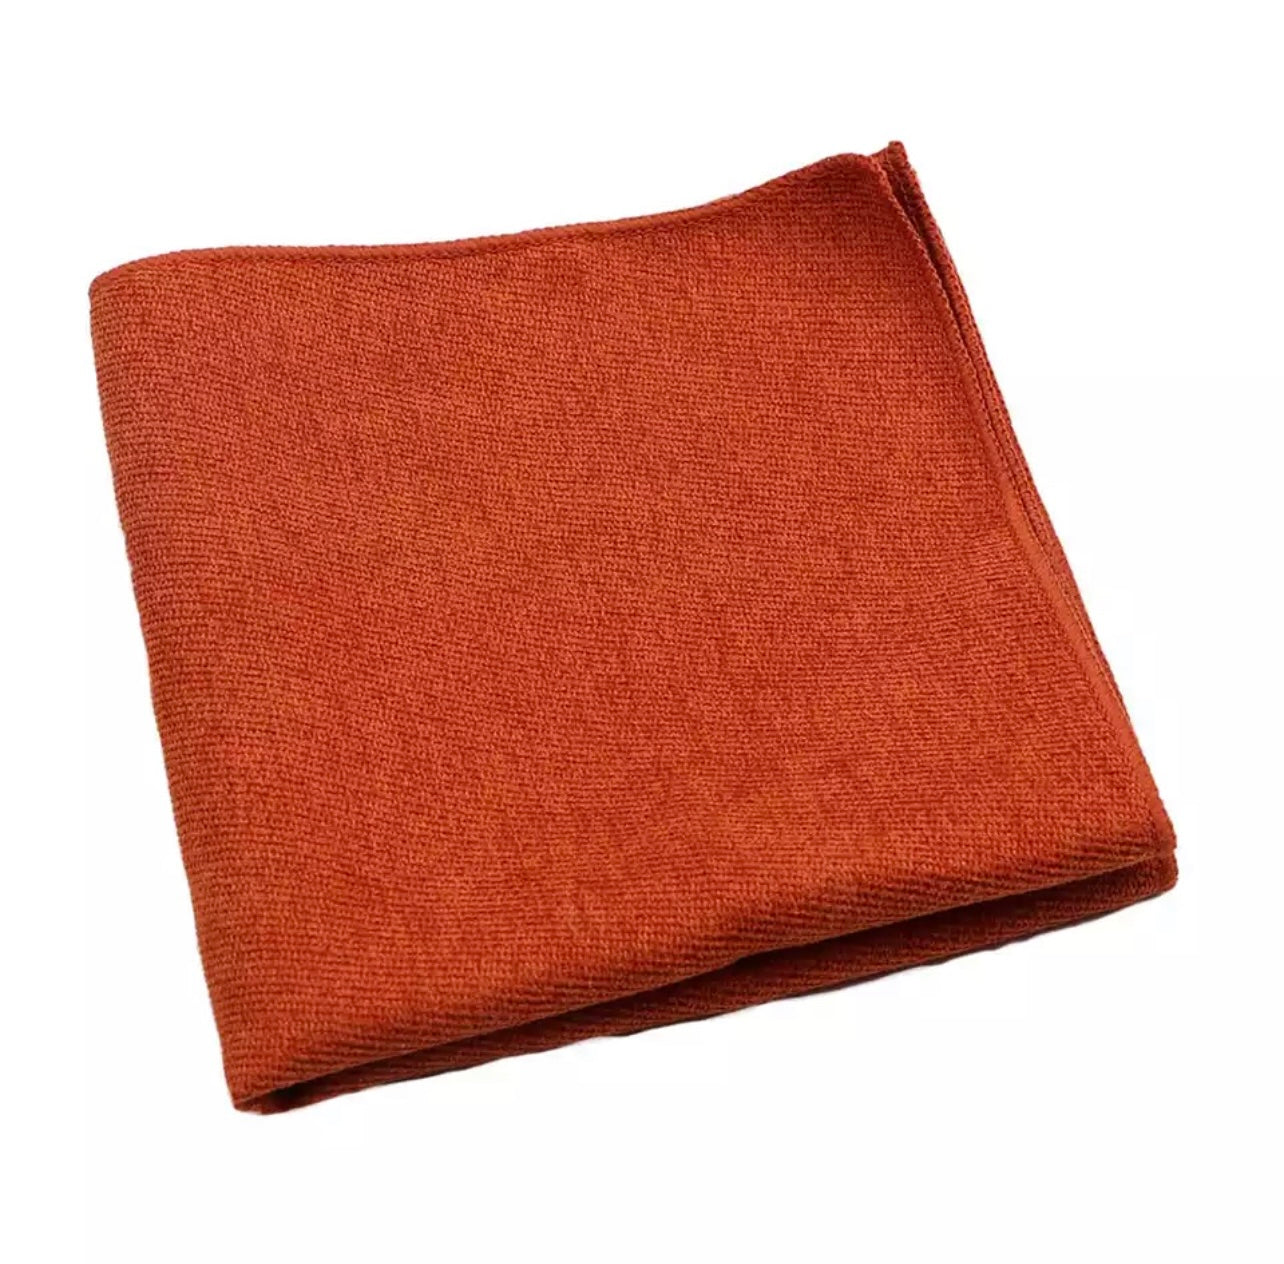 Terracotta Rust Pocket Square SAFFRON Mytieshop Terracotta Rust Pocket Square Material SuedeItem Length: 23 cm ( 9 inches)Item Width : 22 cm (8.6 inches) Color: Red Orange Elevate your style with a touch of SAFFRON. Inspired by the natural beauty of the saffron flower, this pocket square is the perfect way to add a touch of luxury to your outfit. With its rich, earthy colors, it's perfect for any formal or special occasion. Made from 100% silk, this pocket square is a luxurious addition to your 